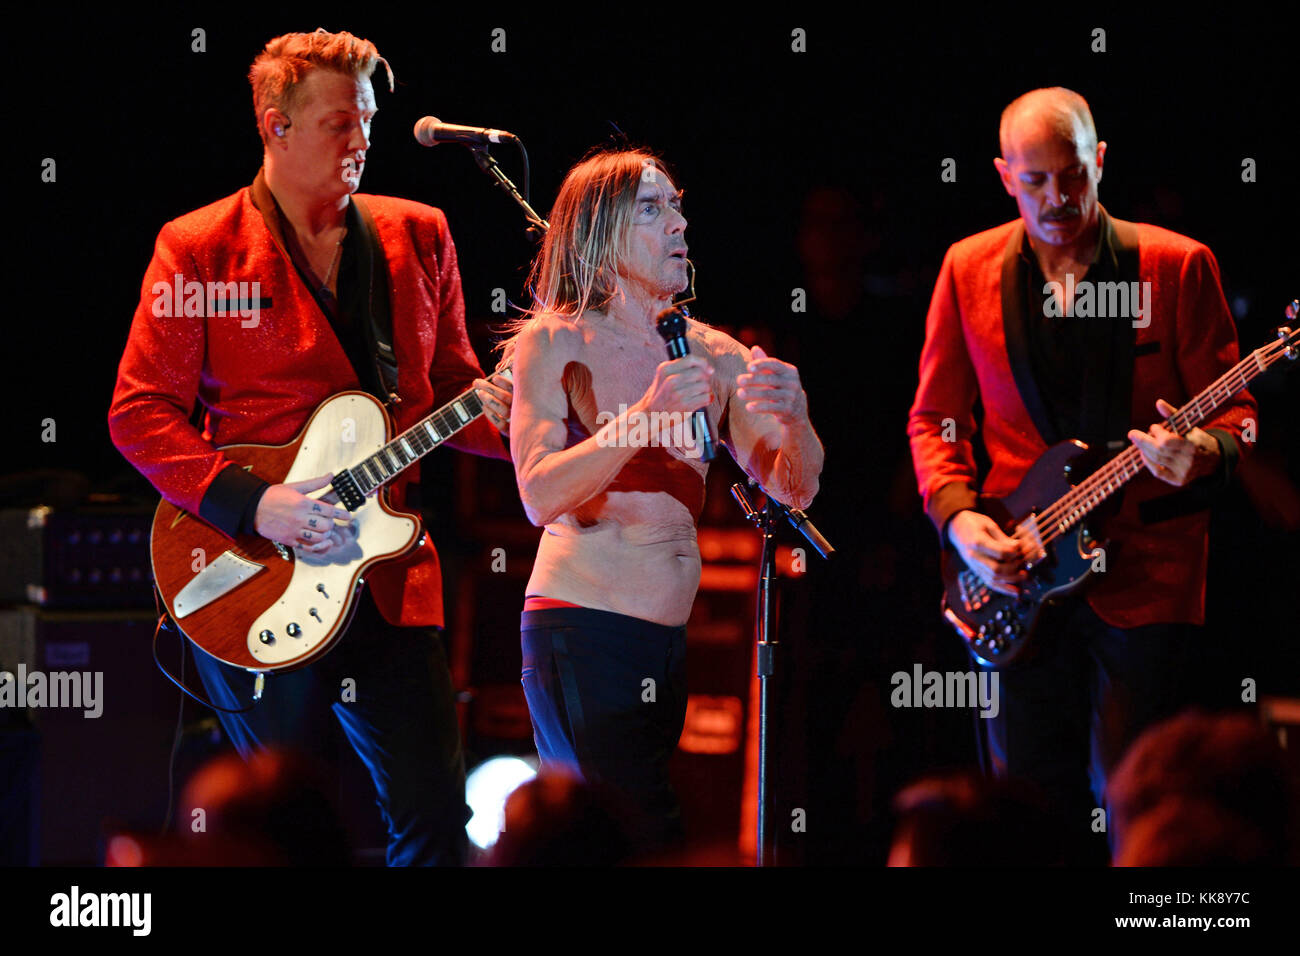 MIAMI BEACH, FL - APRIL 19: Iggy Pop is joined onstage by Eagles of Death  Metal (Paris Bombing) guitar player Josh Homme at the Fillmore Miami Beach  two days before his 69th